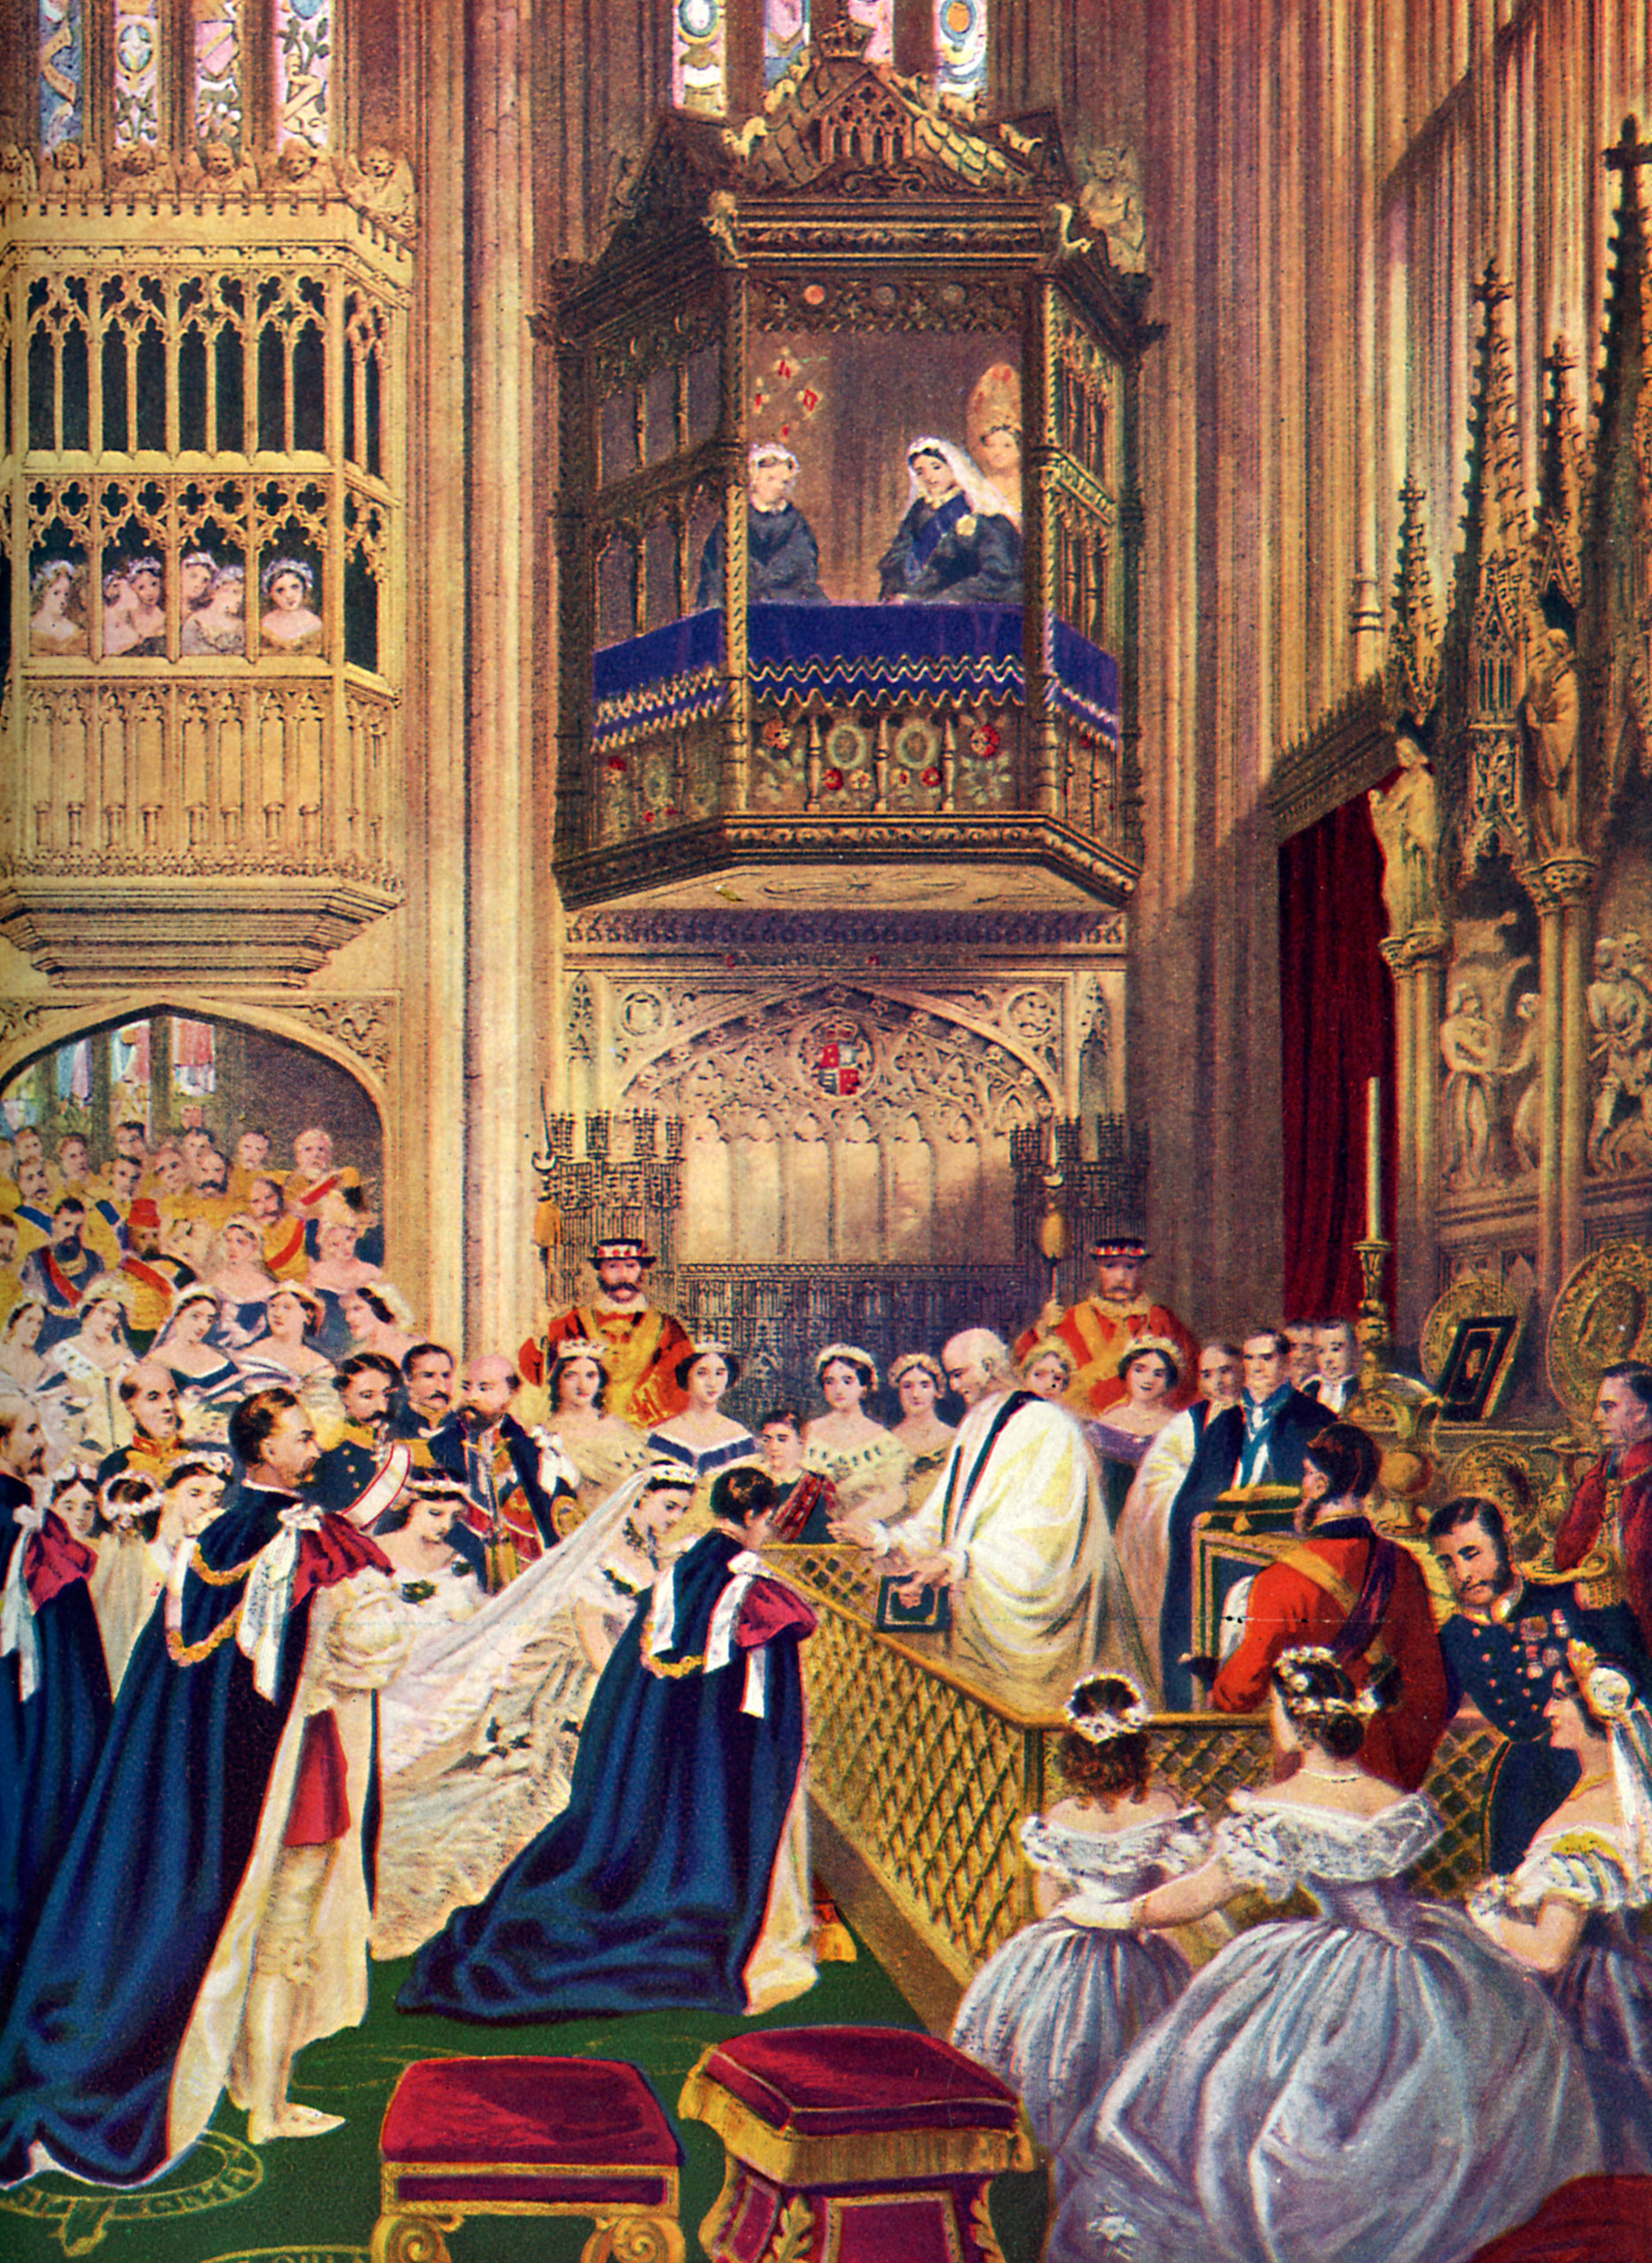 The Prince of Wales marriage to Alexandra of Denmark at St. George 's Chapel, Windsor on March 10, 1863.